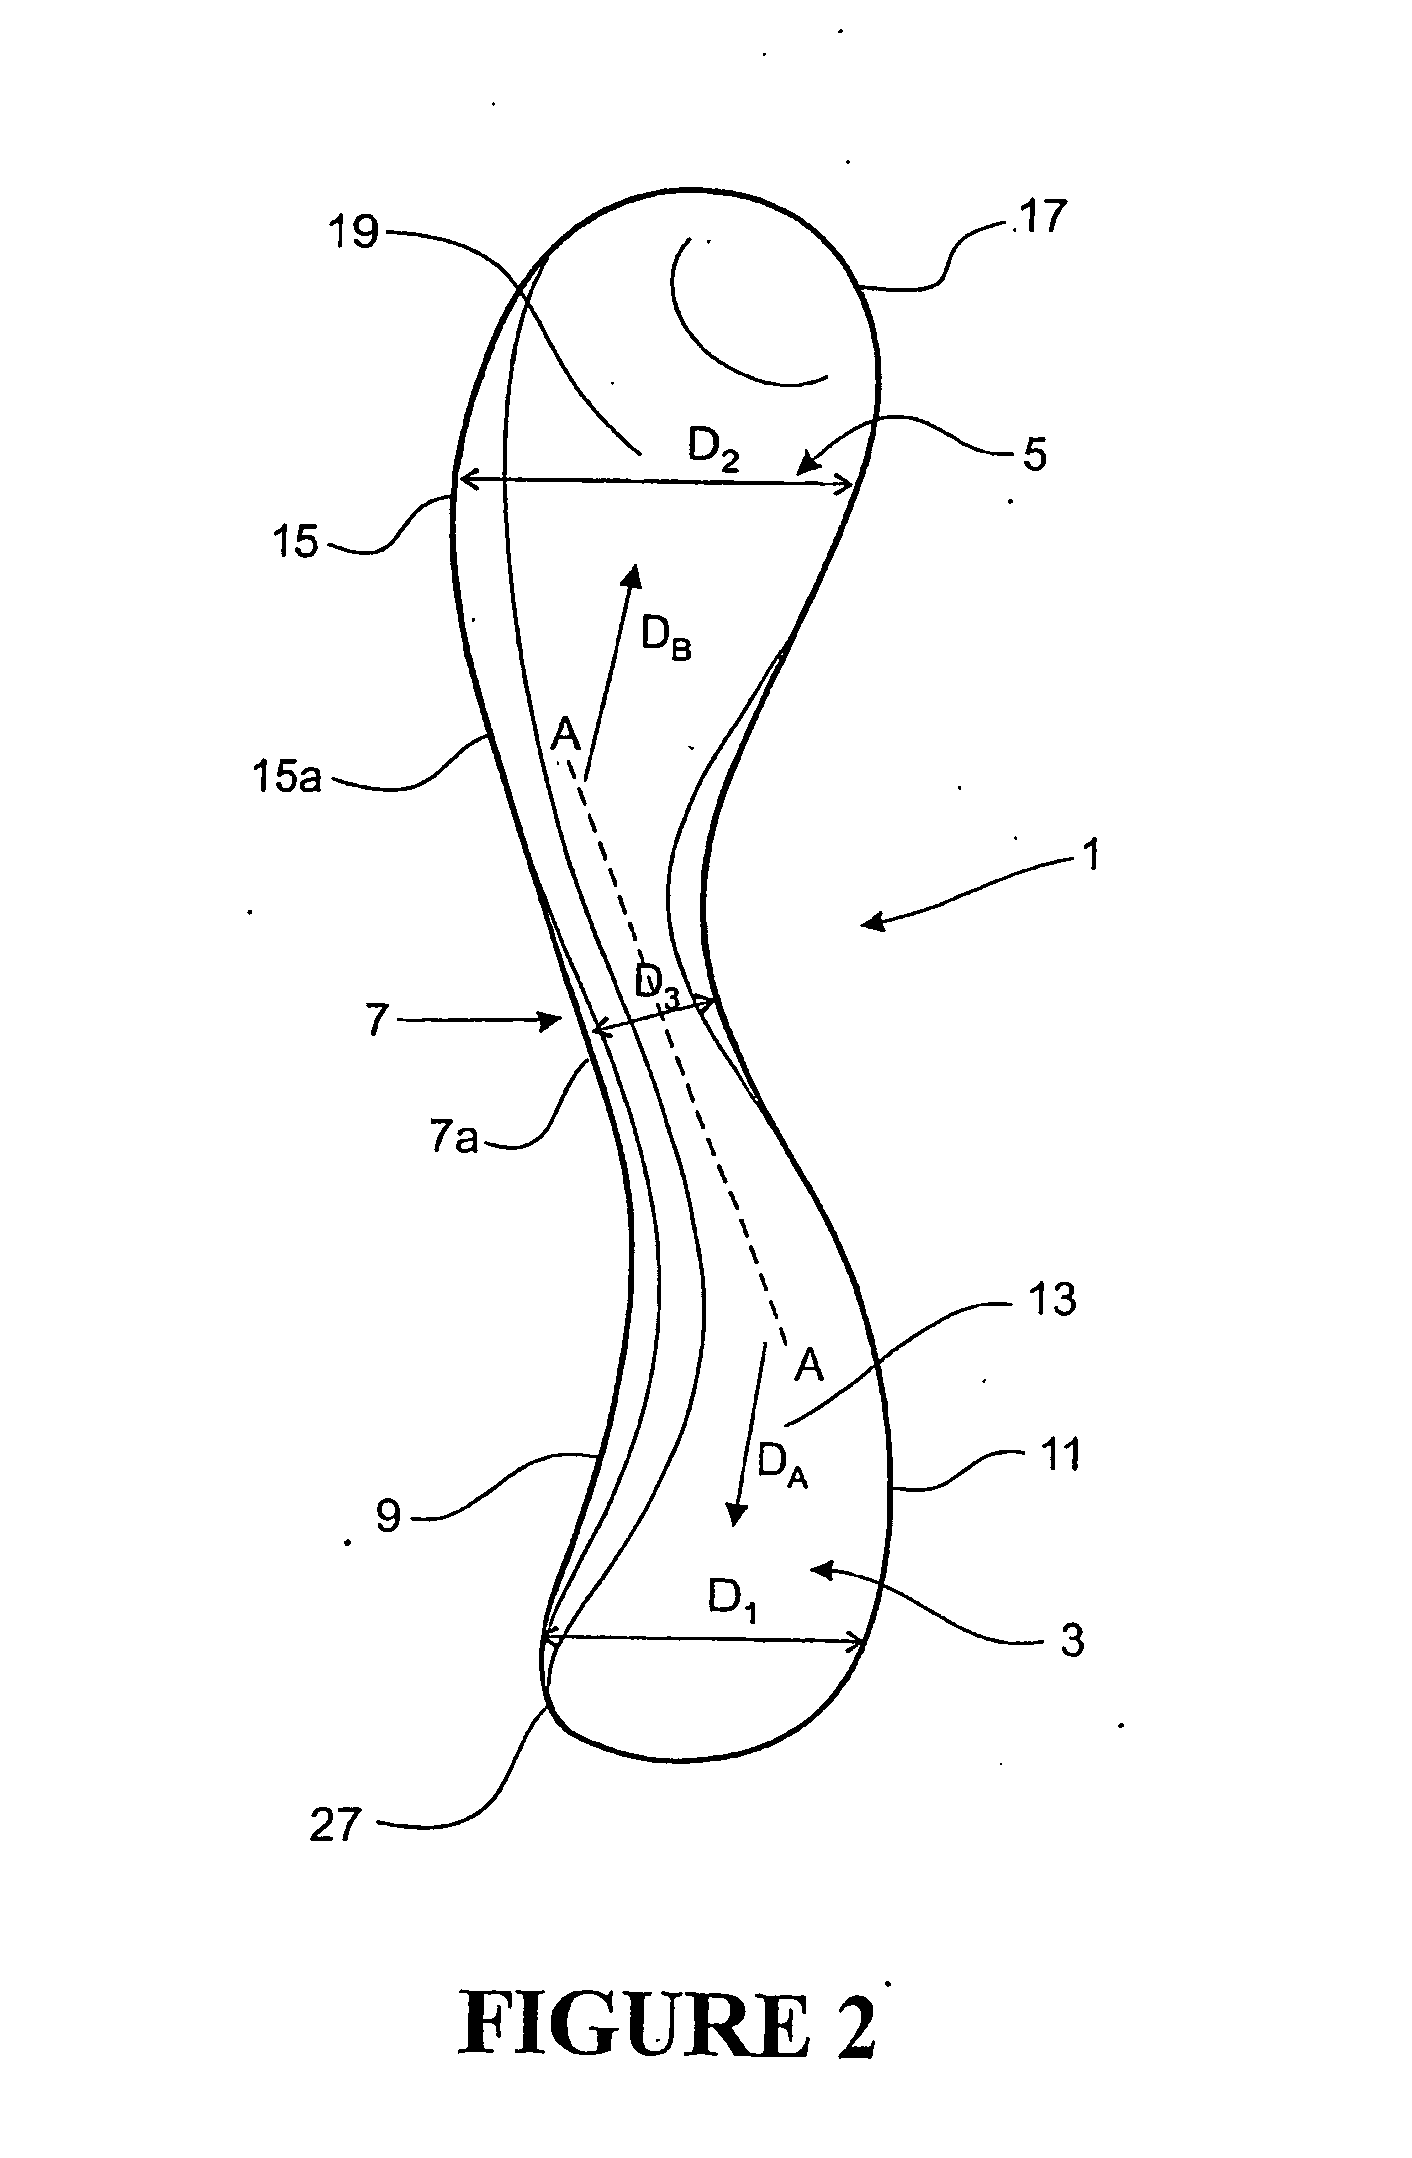 Device for exercising or supporting the pelvic floor muscles